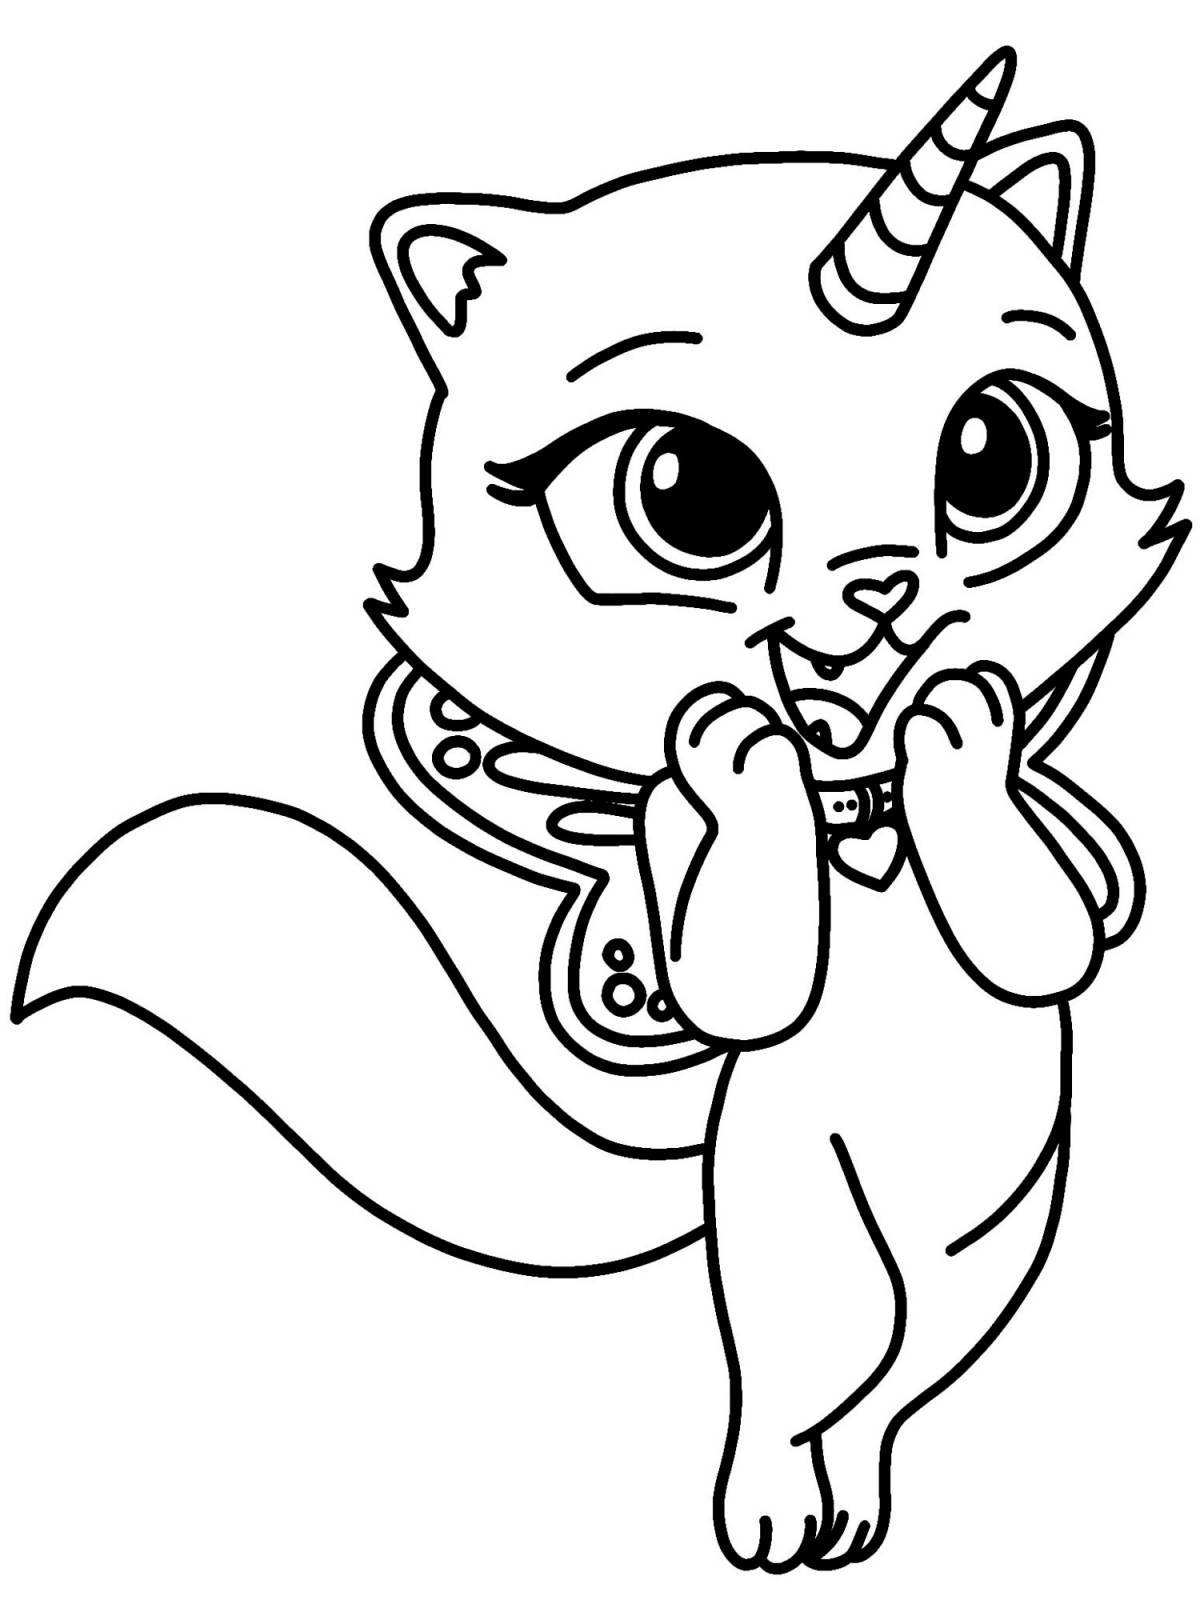 Kitty laughing coloring book